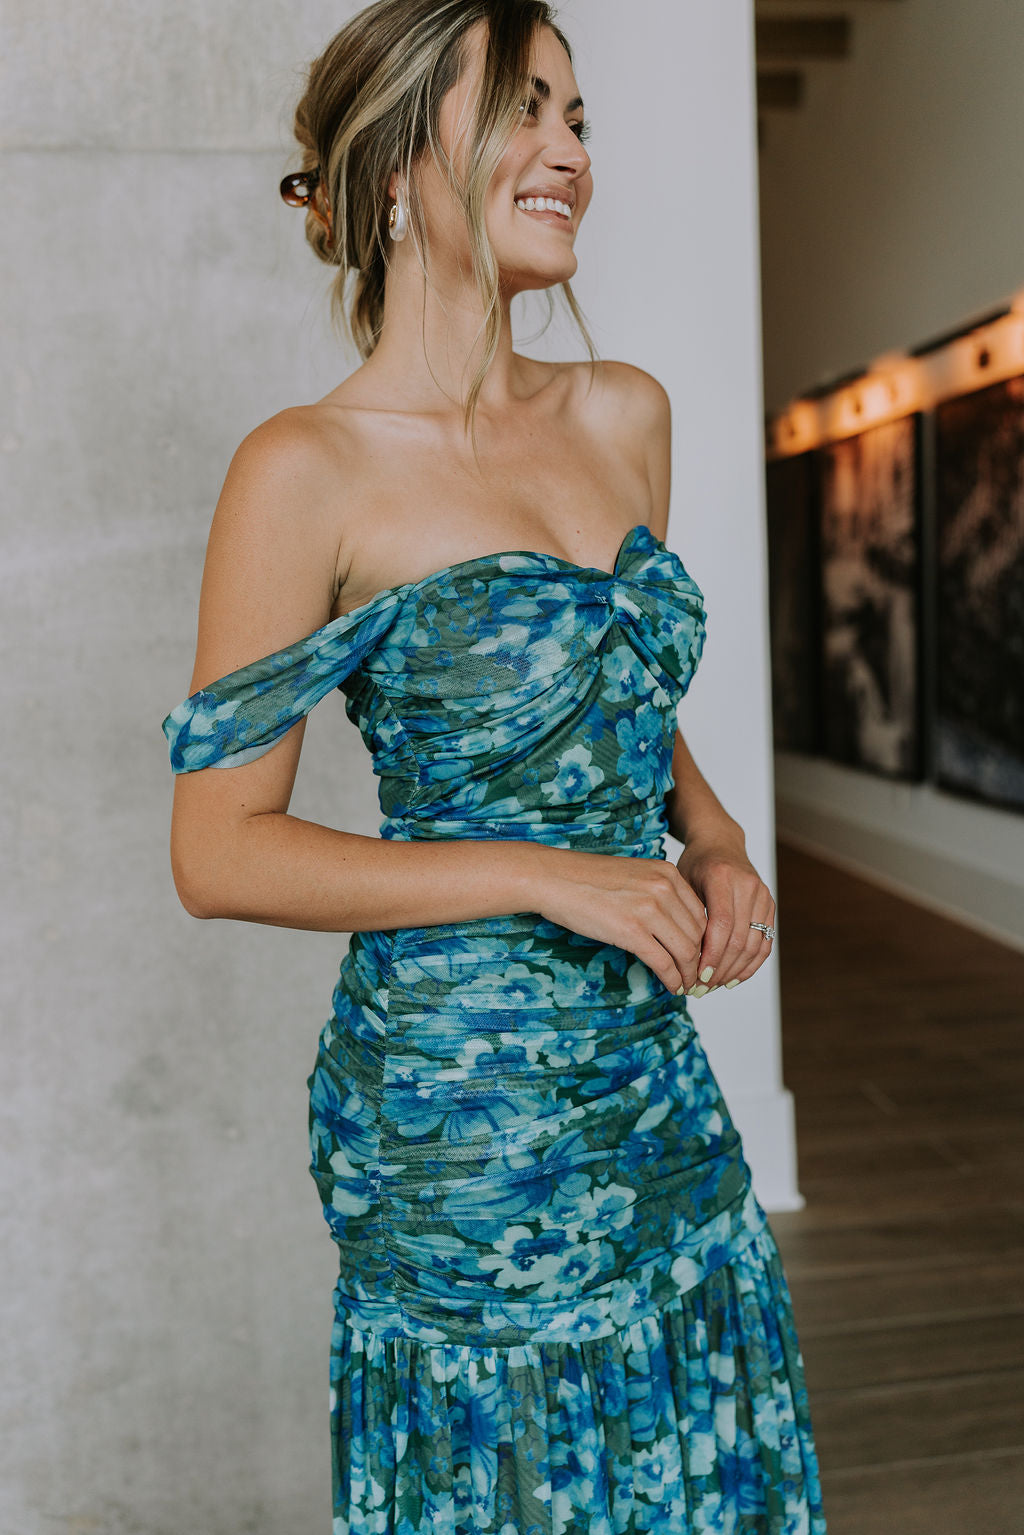 side view of female model wearing the Khloe Blue & Green Floral Ruched Midi Dress which features Blue and Green Floral Print, Ruched Fabric, Flare Skirt Hem with Slit, Sweetheart Neckline, Straps and Monochrome Side Zipper with Hook Closure